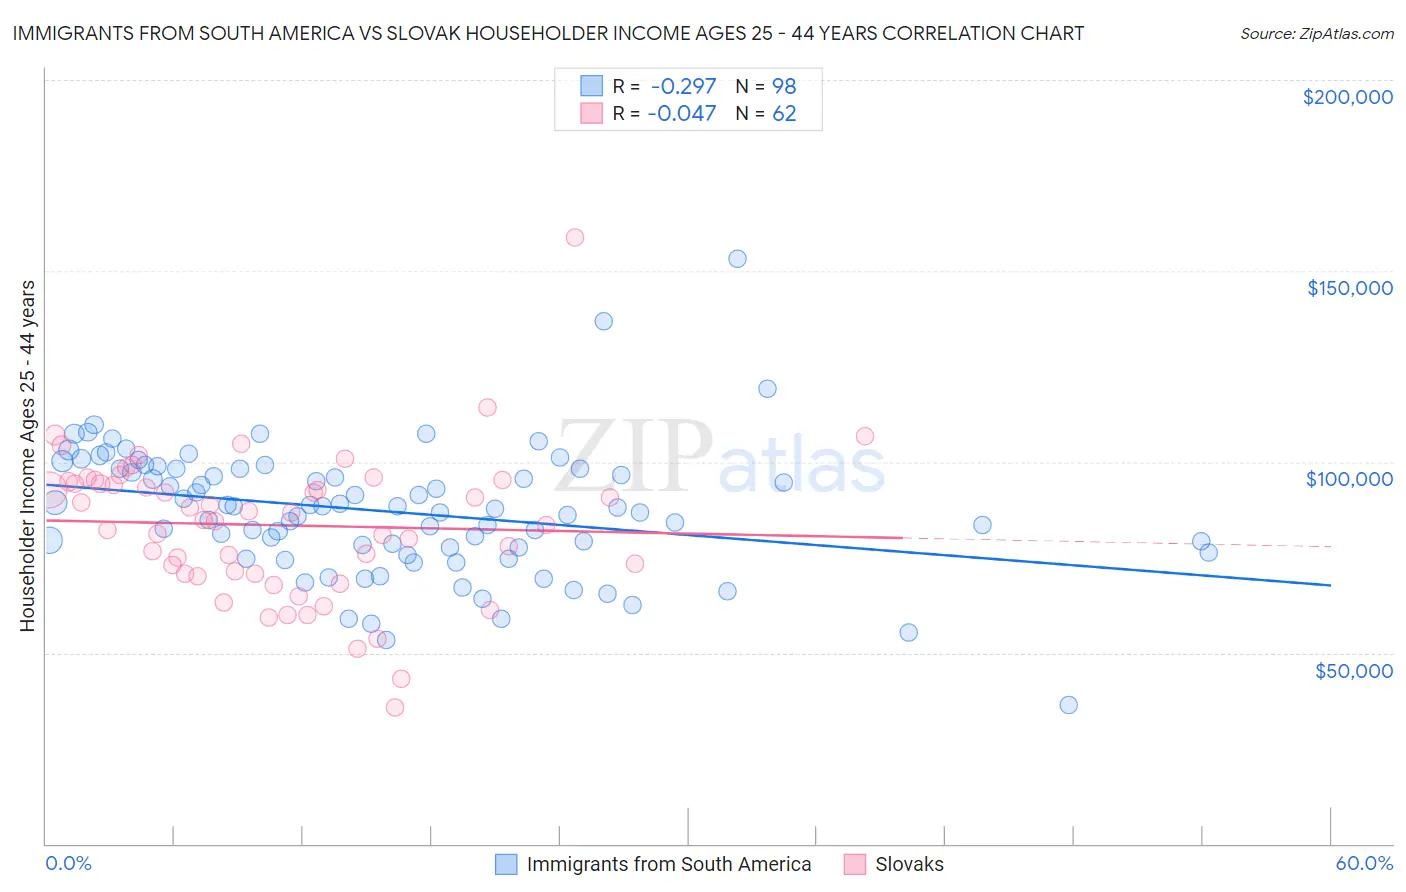 Immigrants from South America vs Slovak Householder Income Ages 25 - 44 years